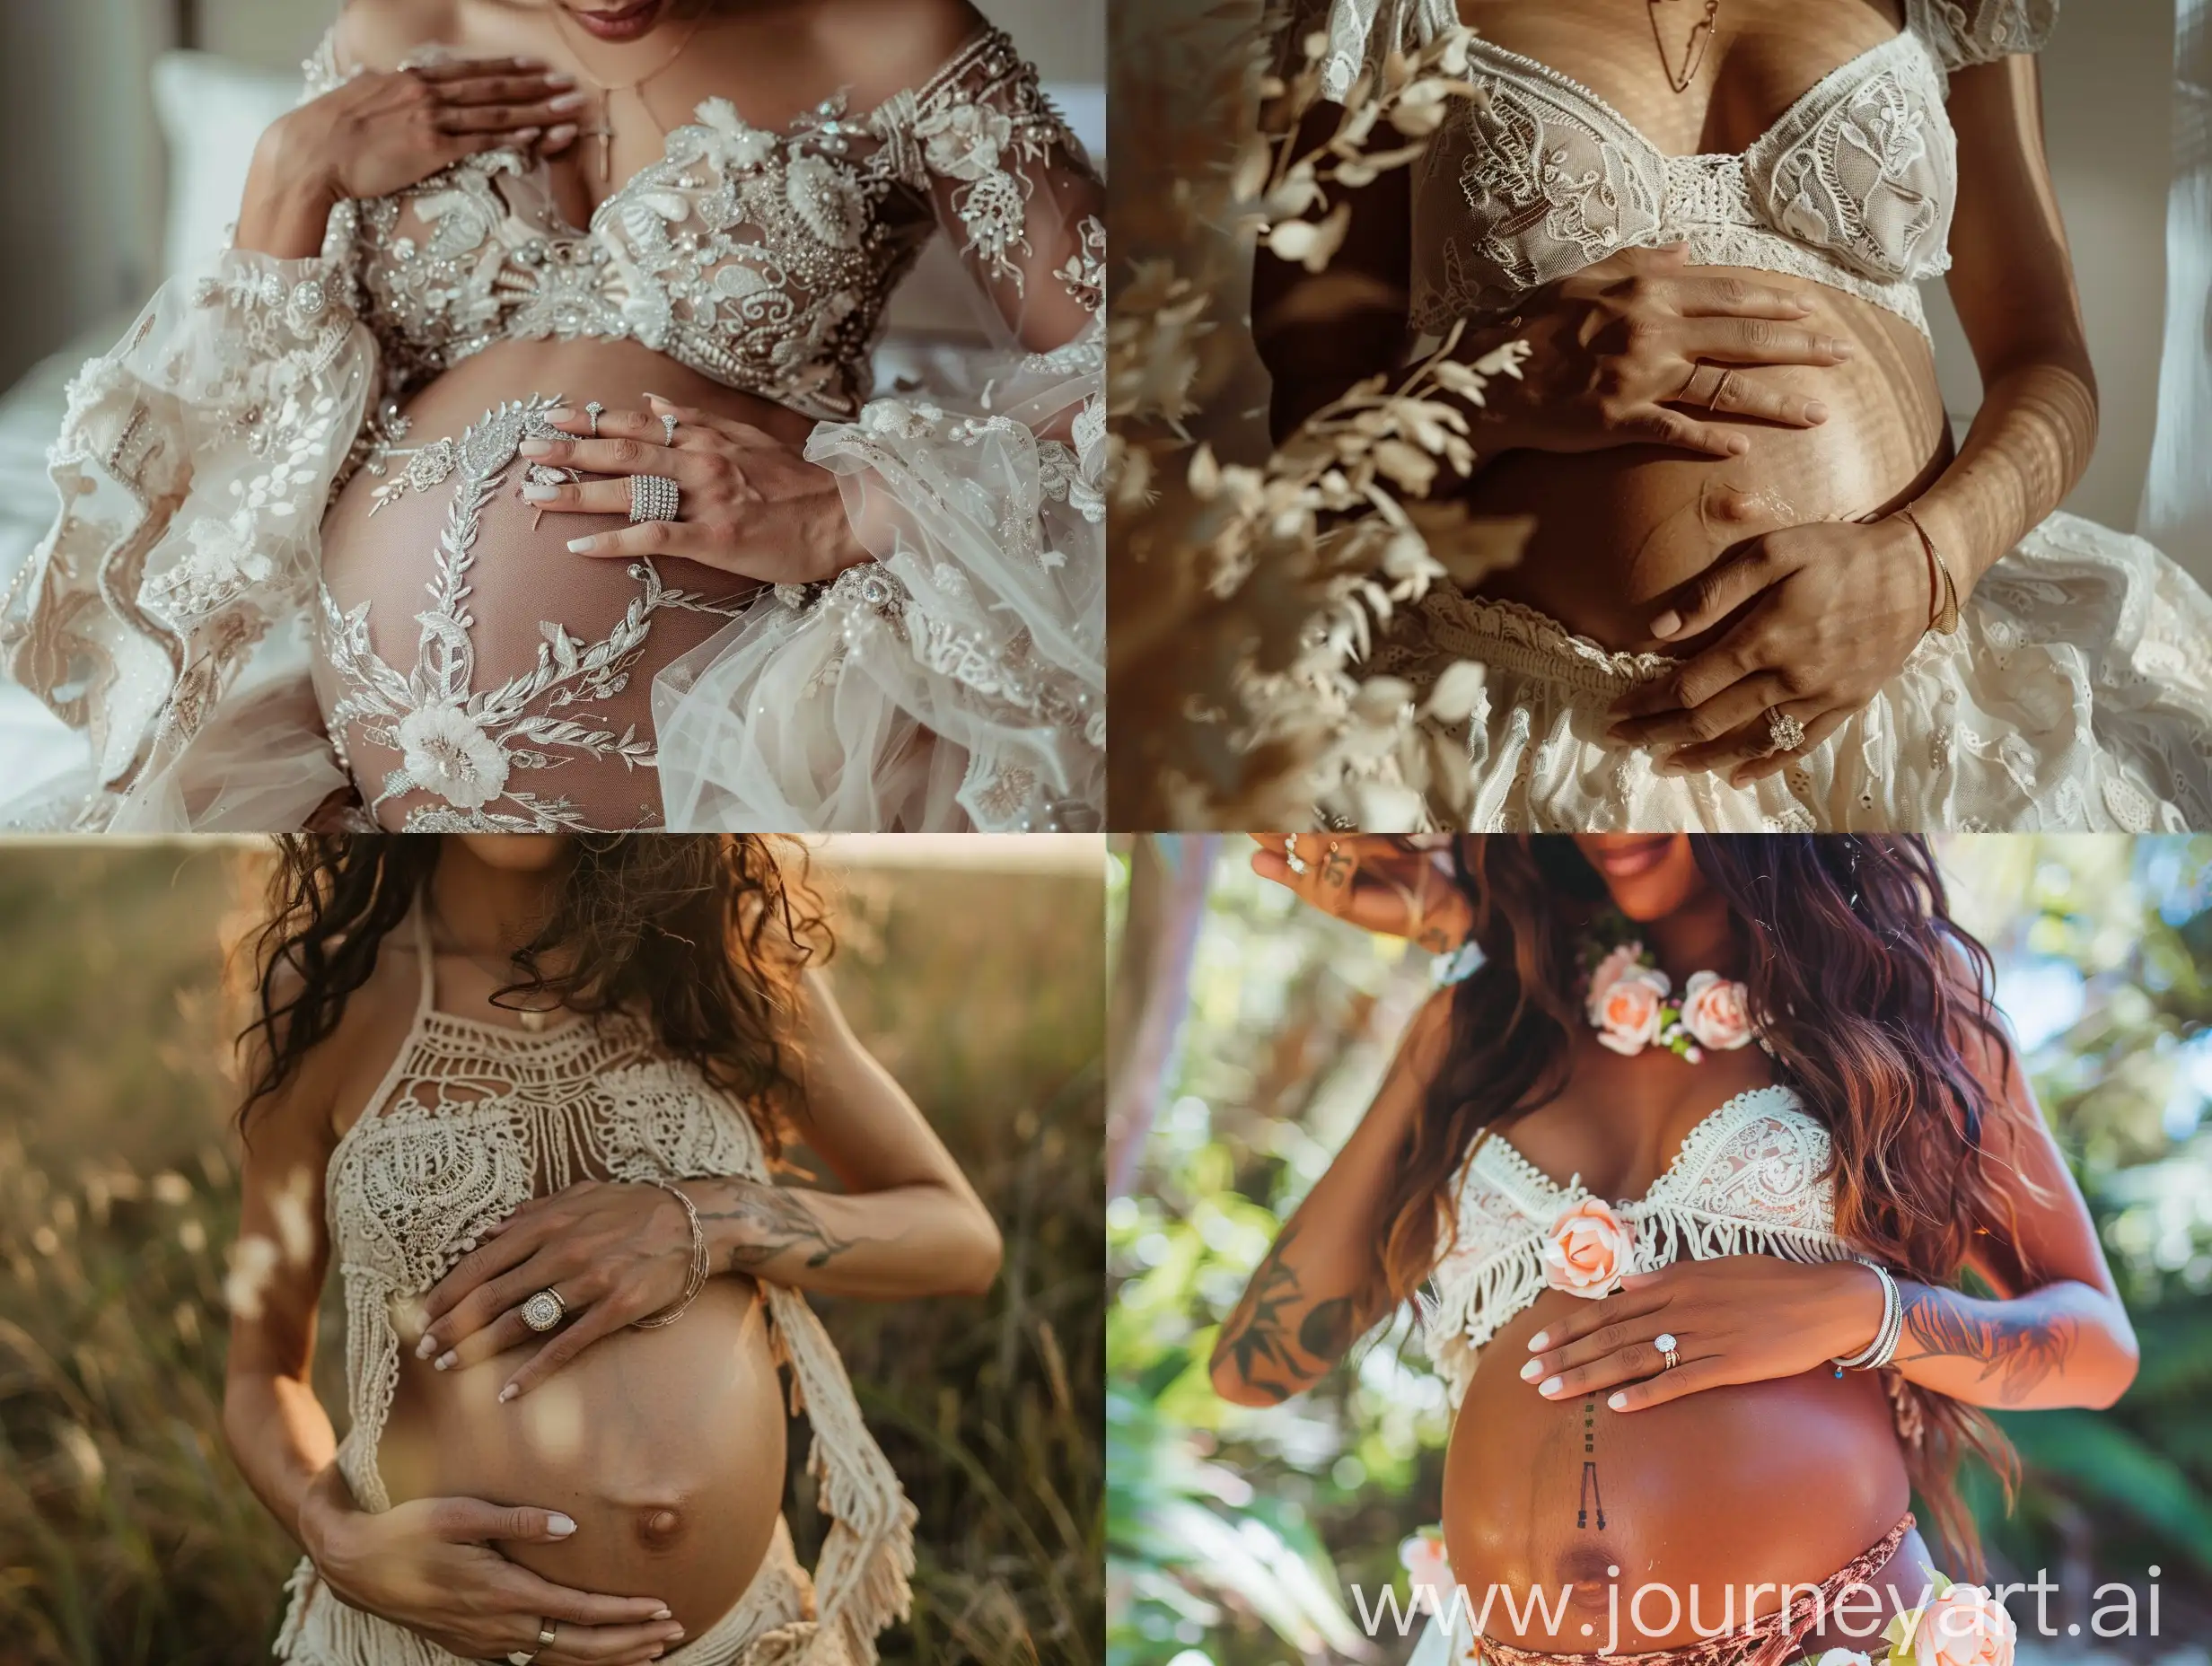 Pregnant-Mother-with-Wedding-Ring-Hands-on-Belly-Instagram-Aesthetic